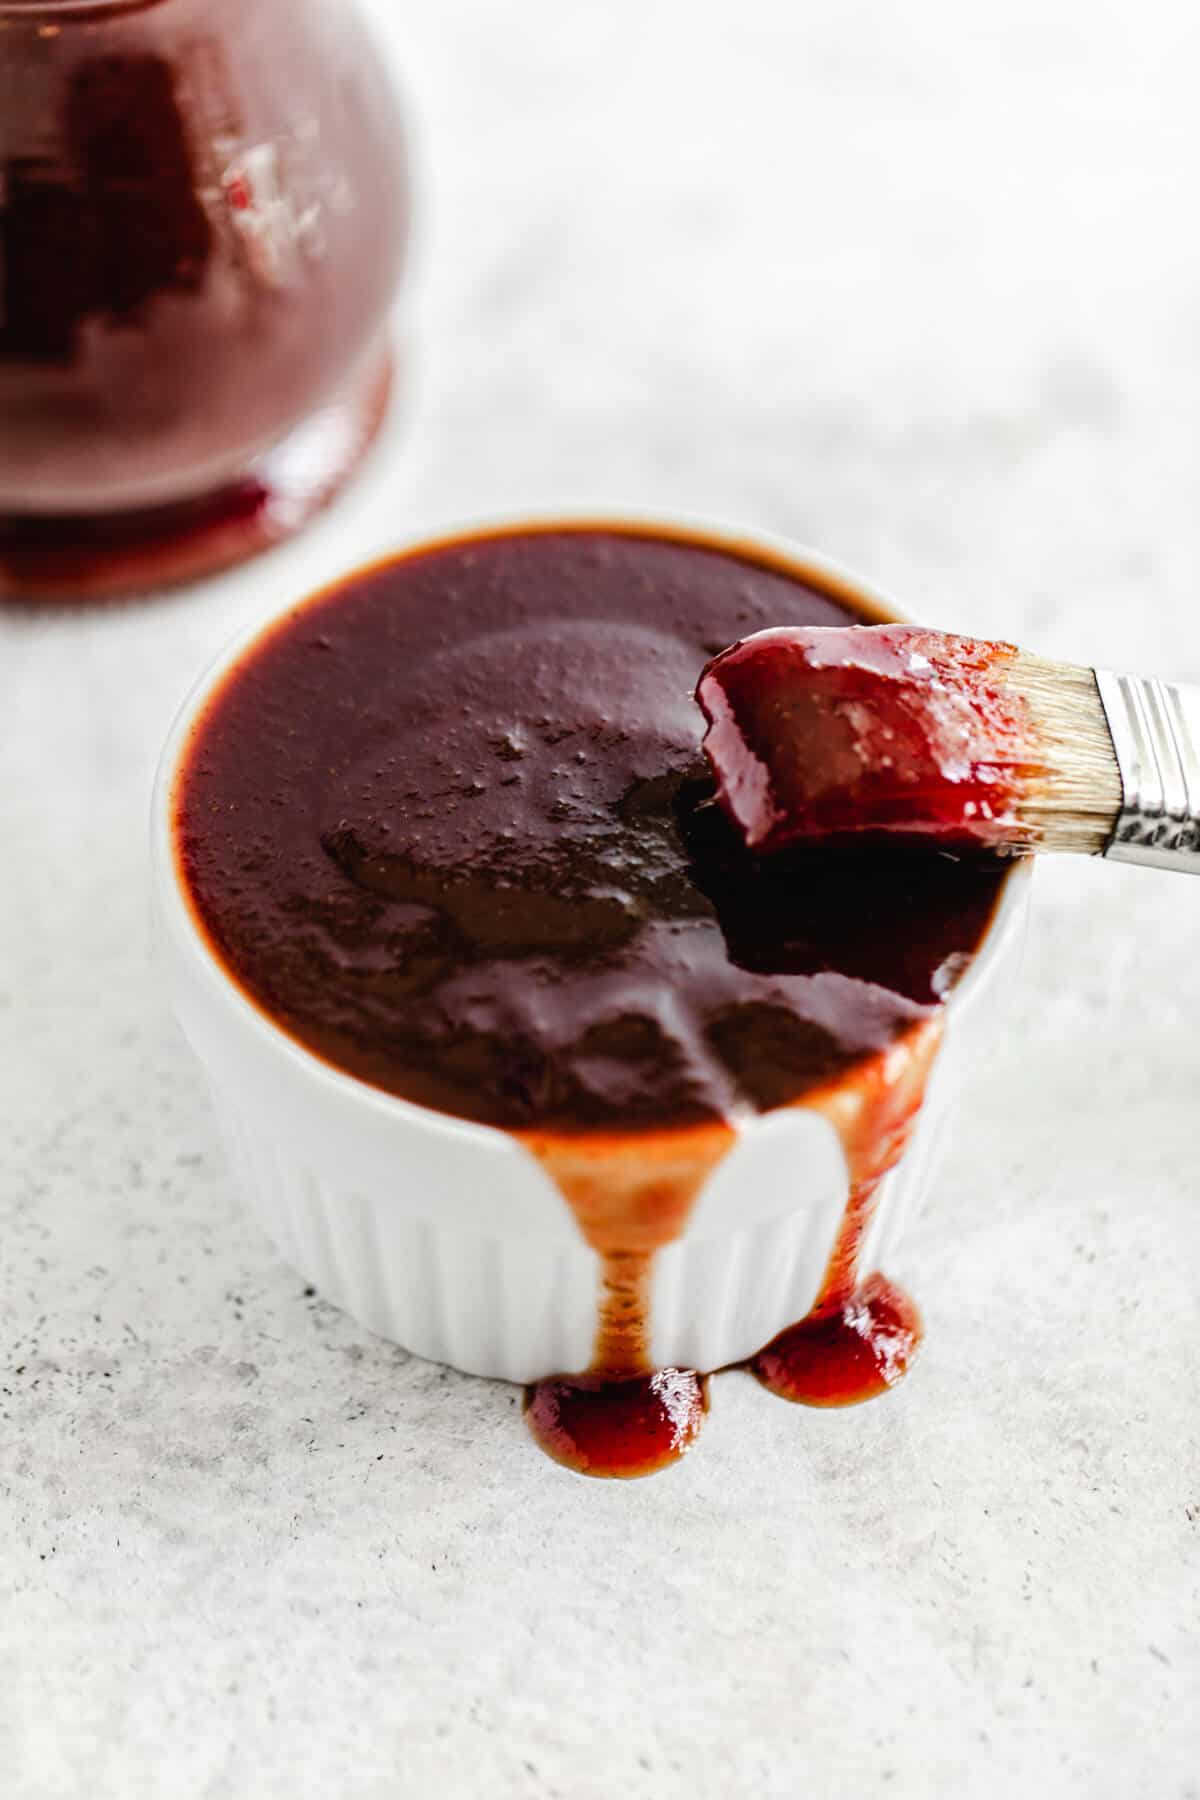 ramekin filled with barbecue sauce dripping over the sides and a dipped pastry brush leaning on the edge